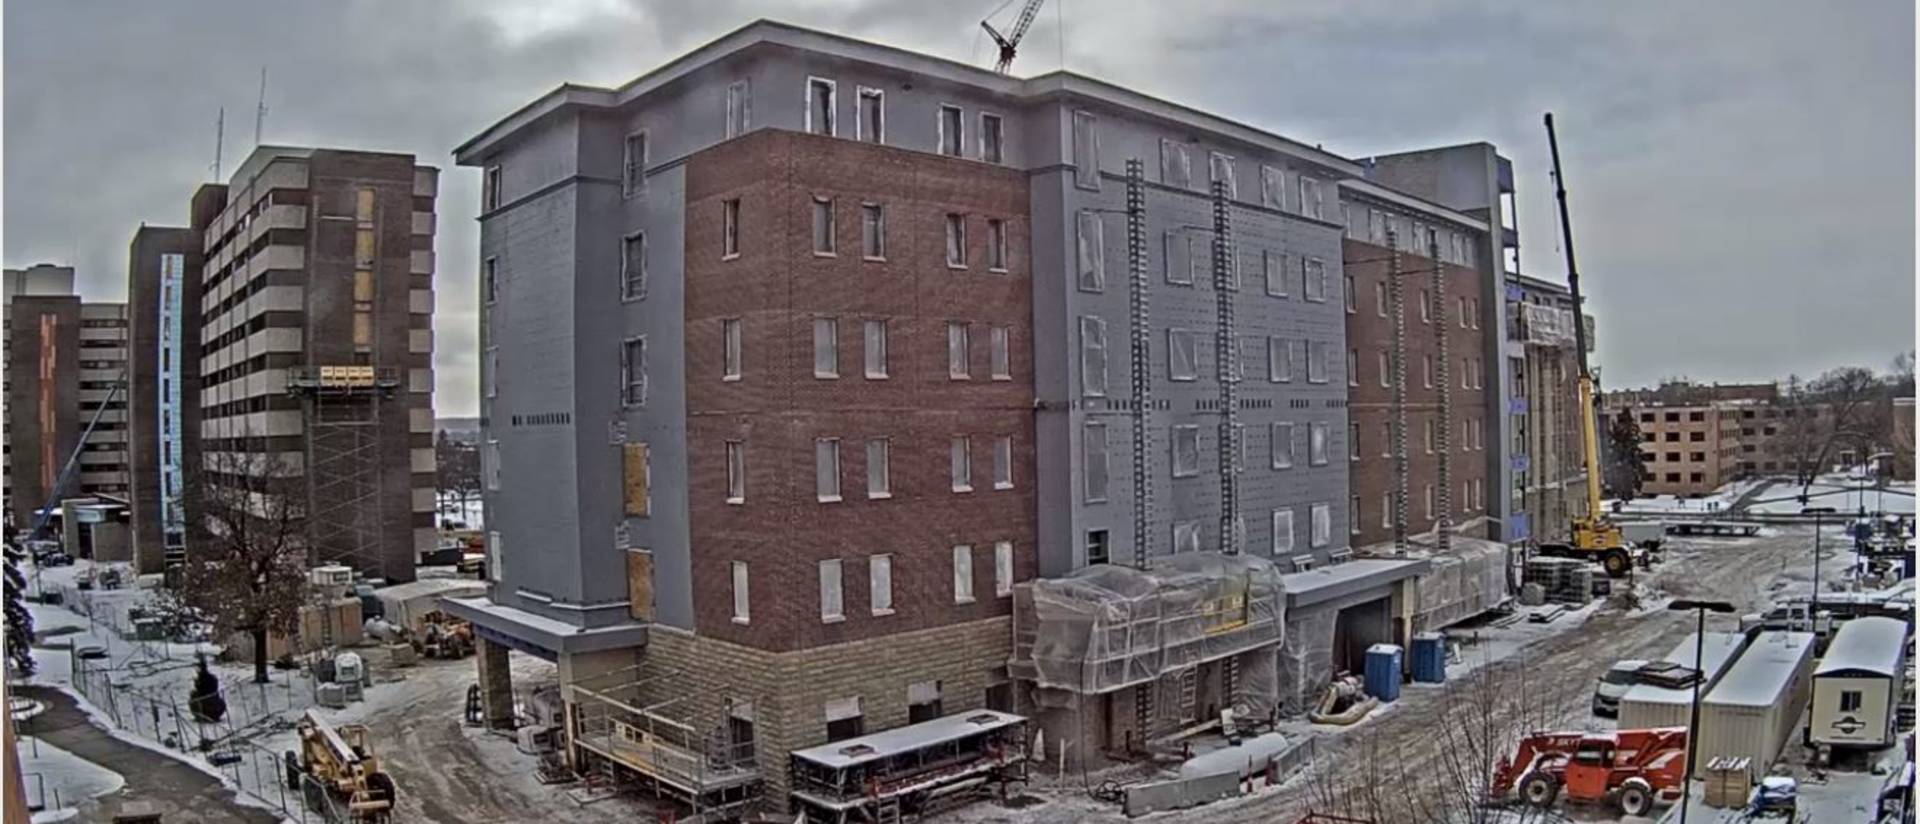 UW-Eau Claire news residence hall construction as of Jan. 24, 2019